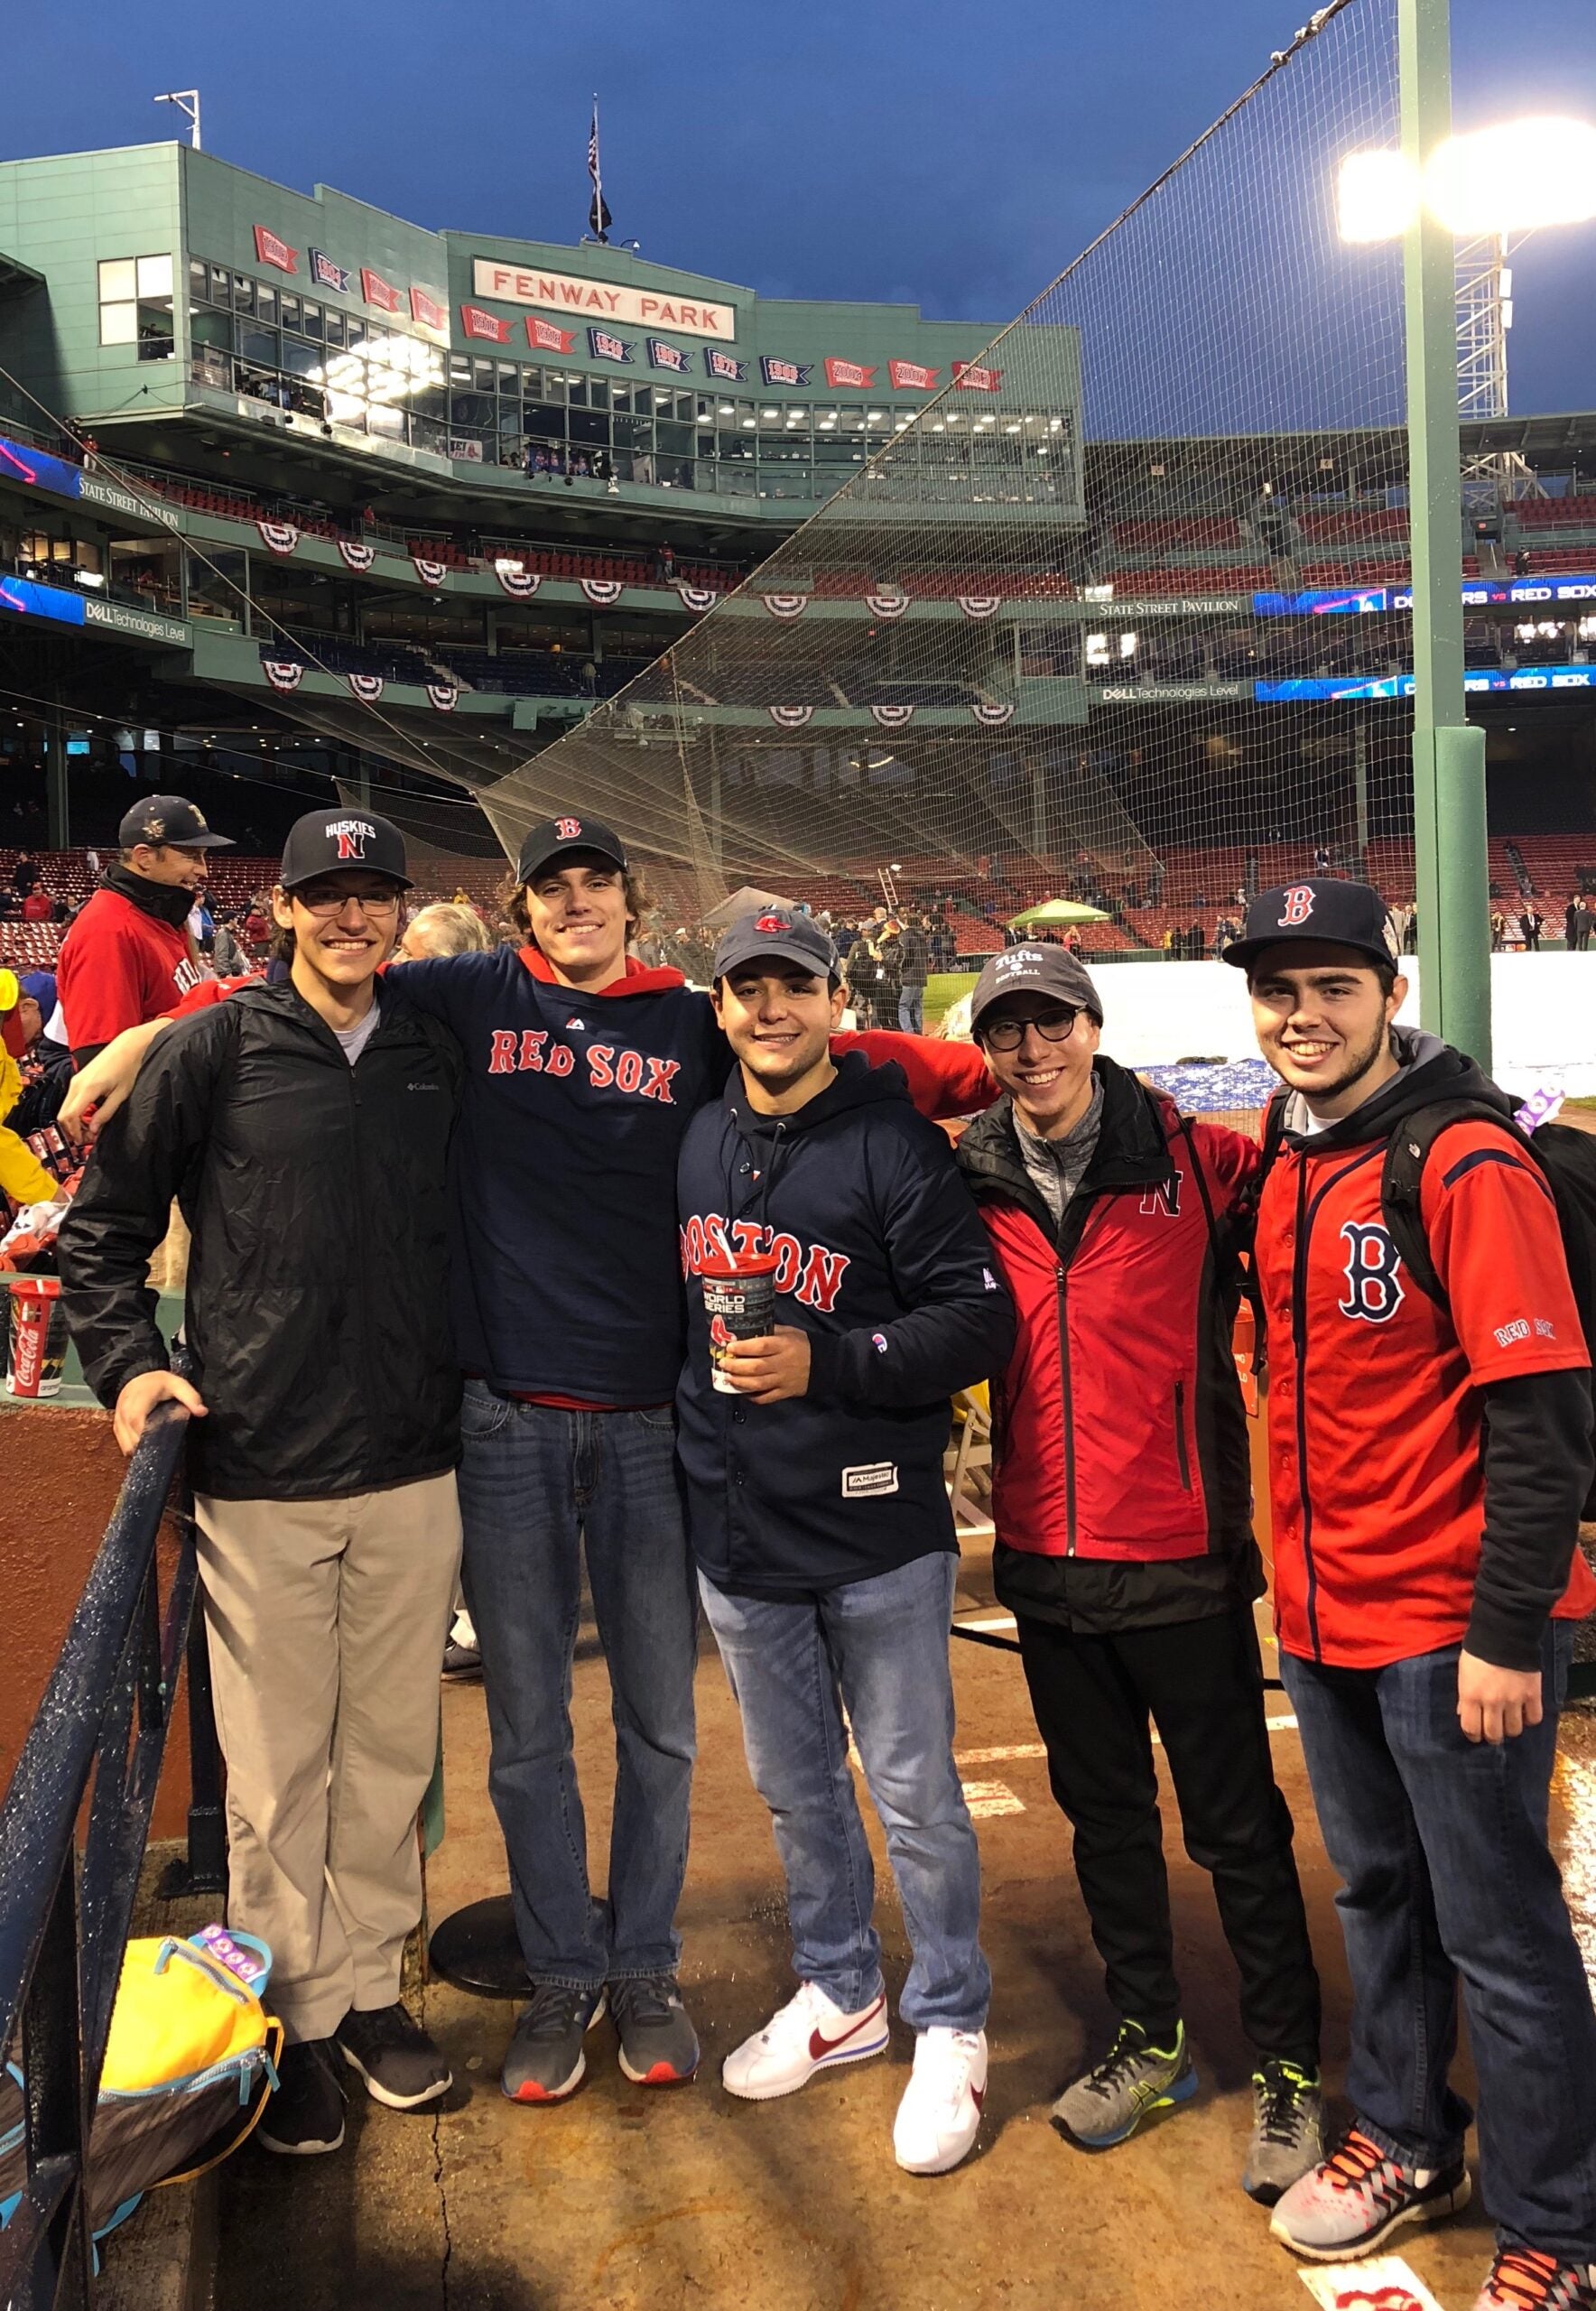 Meet the students who paid $9 for World Series Game 1 tickets